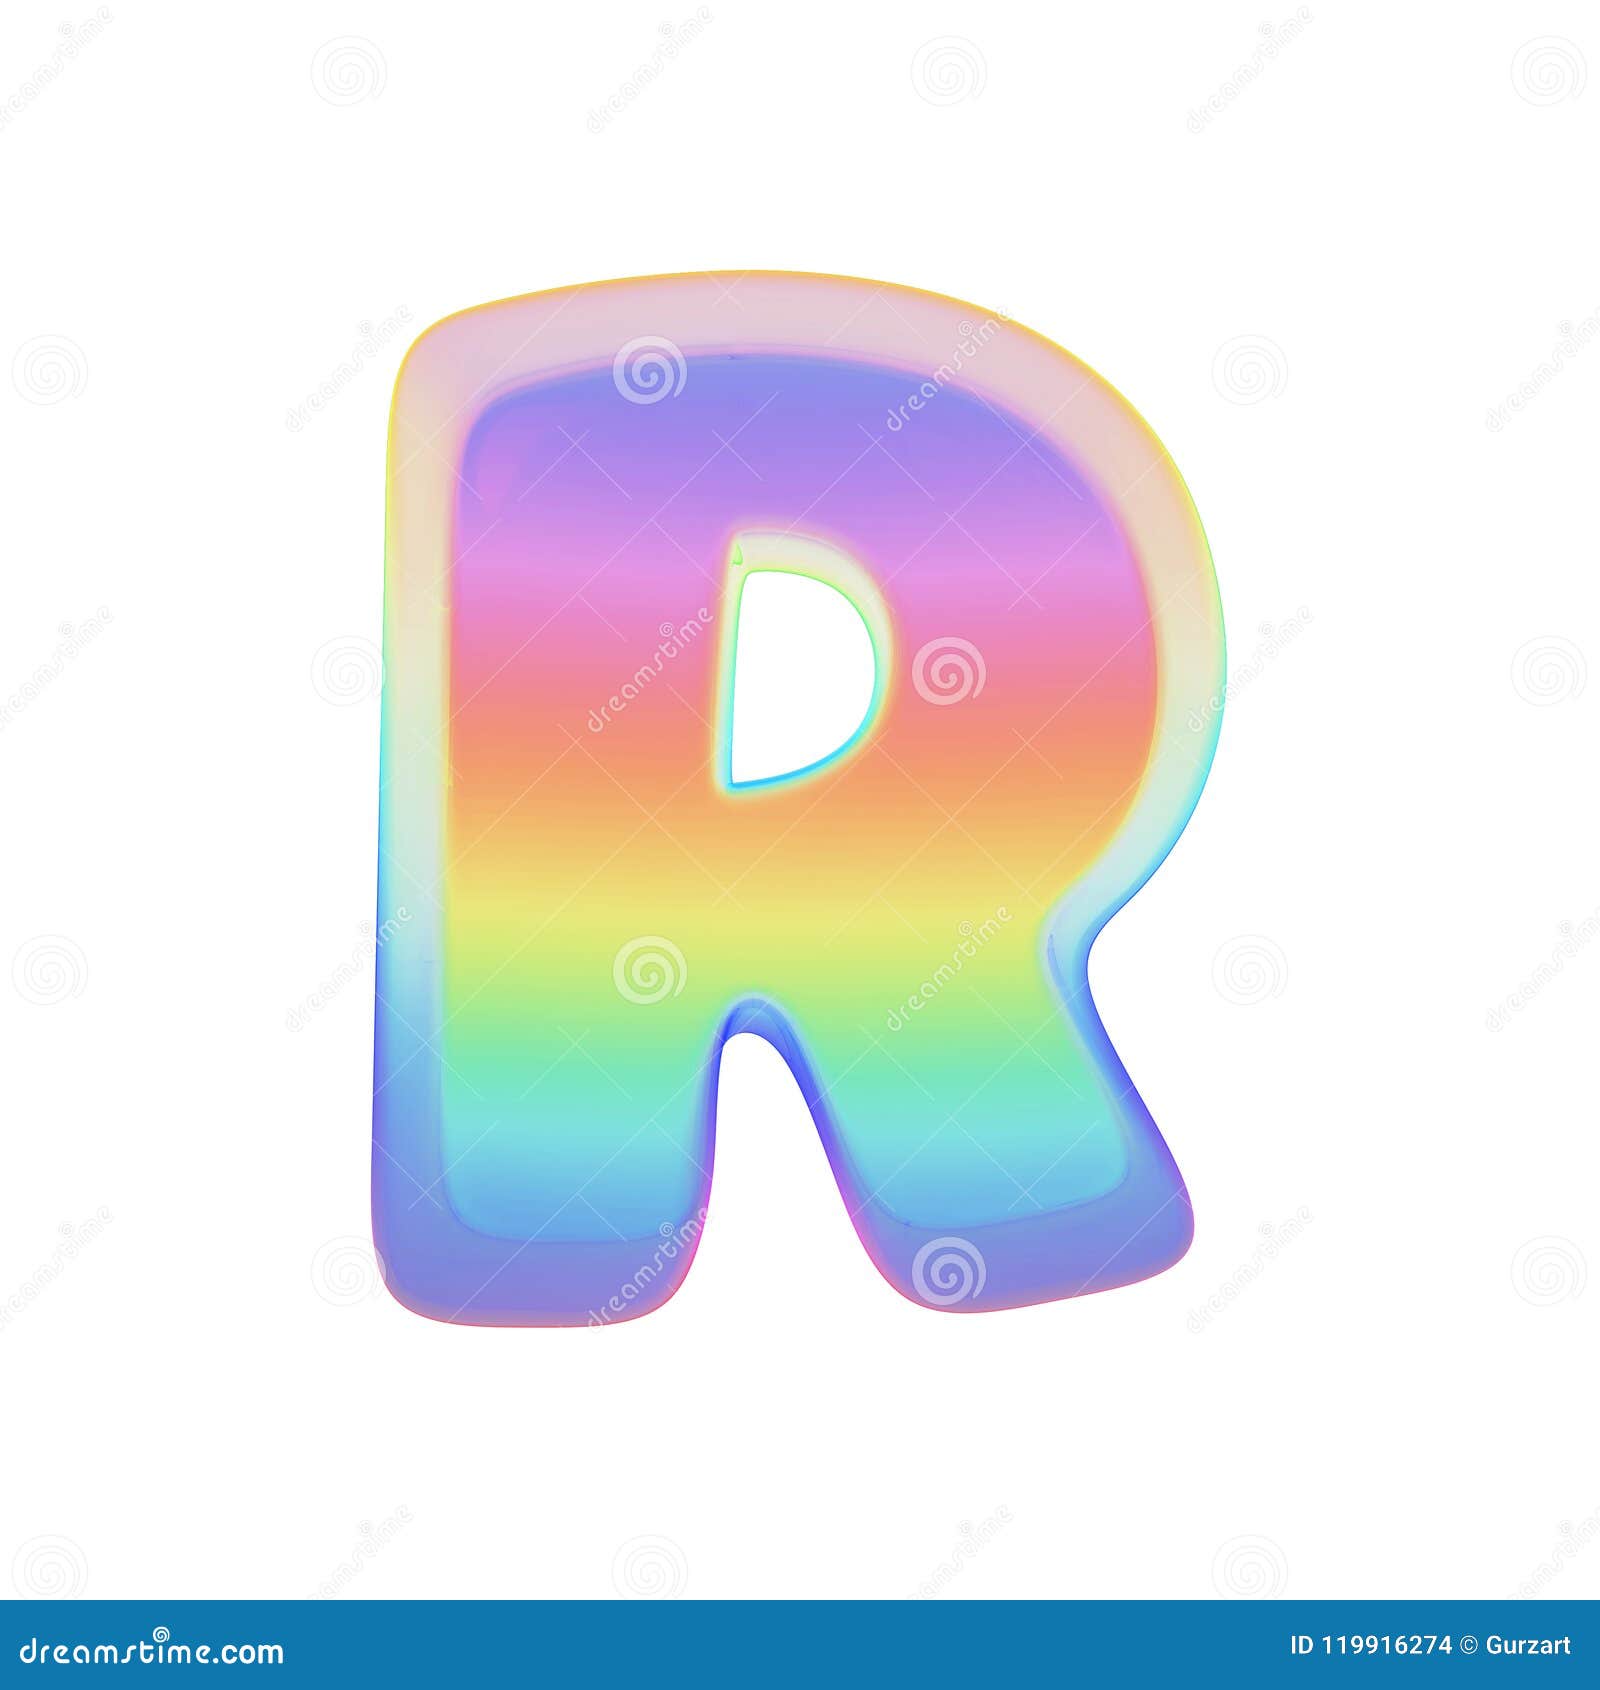 Alphabet Letter R Uppercase Rainbow Font Made Of Bright Soap Bubble